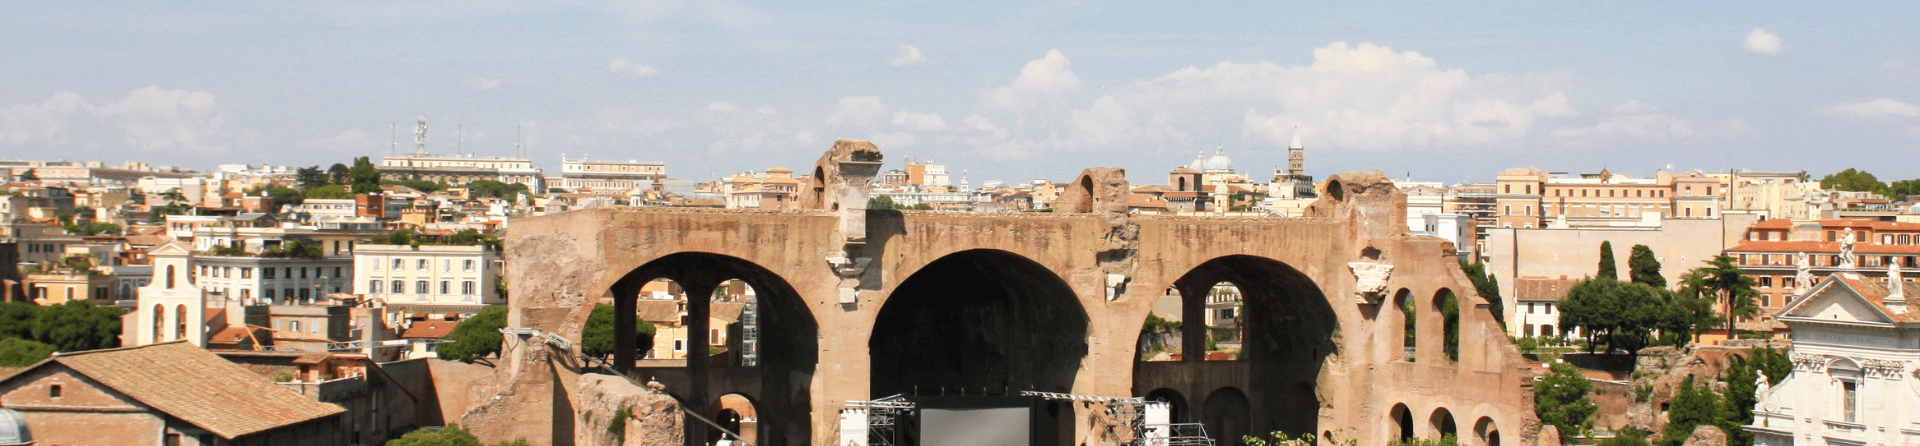 What is so special about the Palatine Hill?